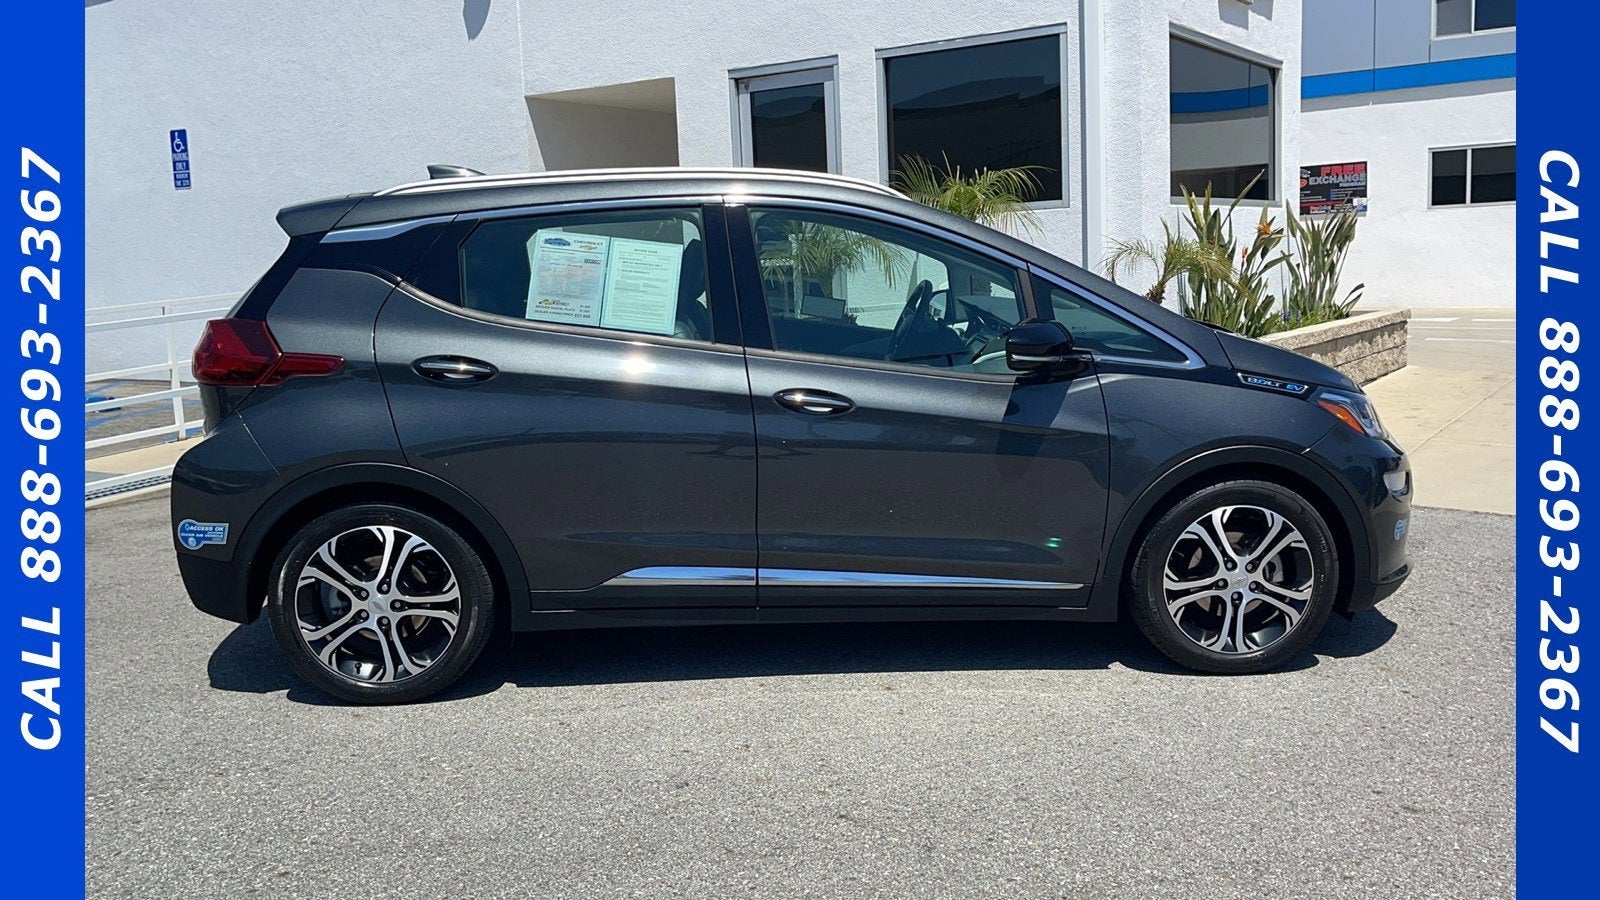 Used 2021 Chevrolet Bolt EV Premier with VIN 1G1FZ6S00M4108030 for sale in Upland, CA